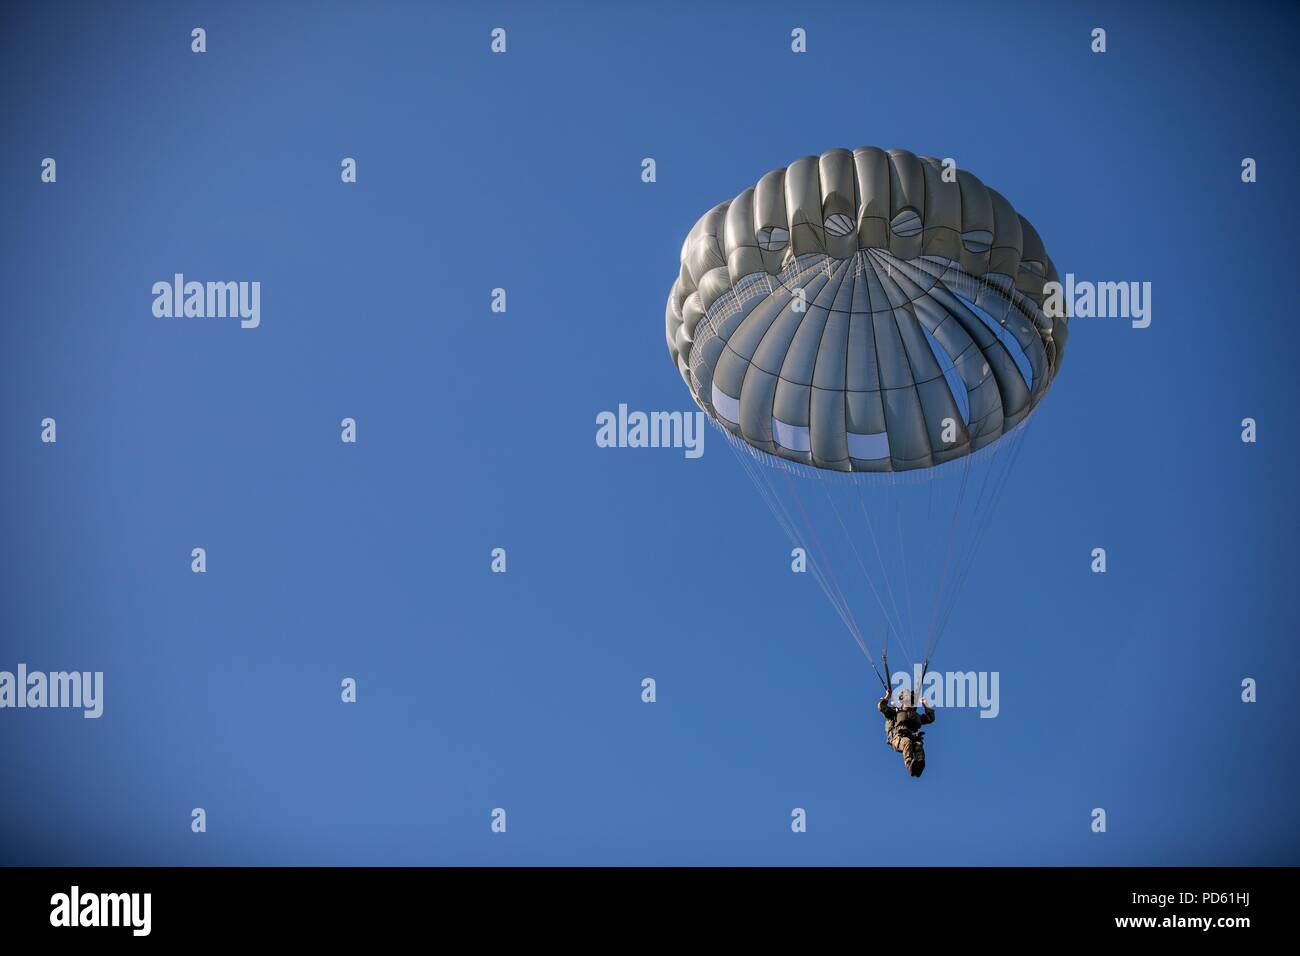 A British paratrooper descends onto Castle Drop Zone during Leapfest at the University of Rhode Island, West Kingston, R.I. Aug. 5, 2018, August 5, 2018. Leapfest is the largest, longest standing, international static line parachute training event and competition hosted by the 56th Troop Command, Rhode Island Army National Guard to promote high level technical and esprit de corps within the International Airborne community. (U.S. Army photo by Sgt. Josephine Carlson). () Stock Photo